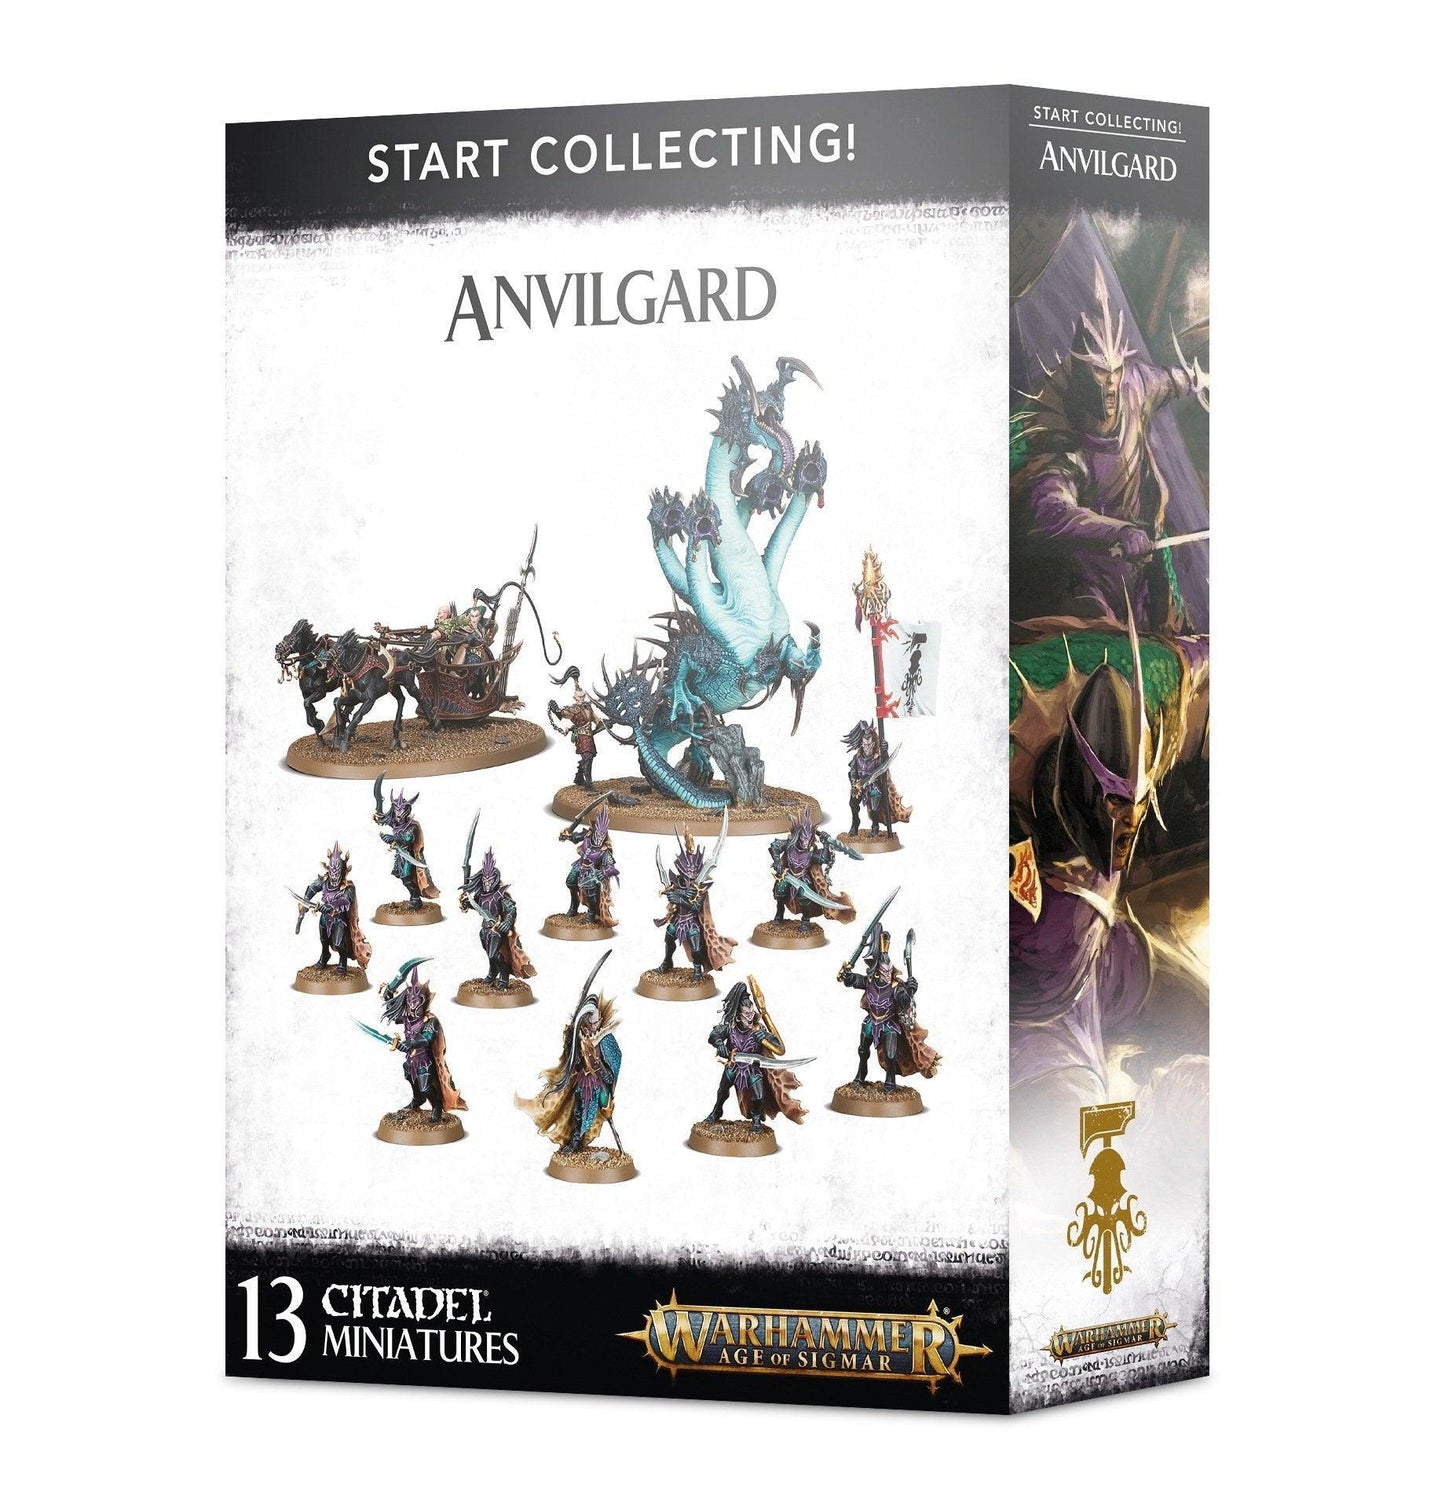 START COLLECTING! ANVILGARD - ZZGames.dk